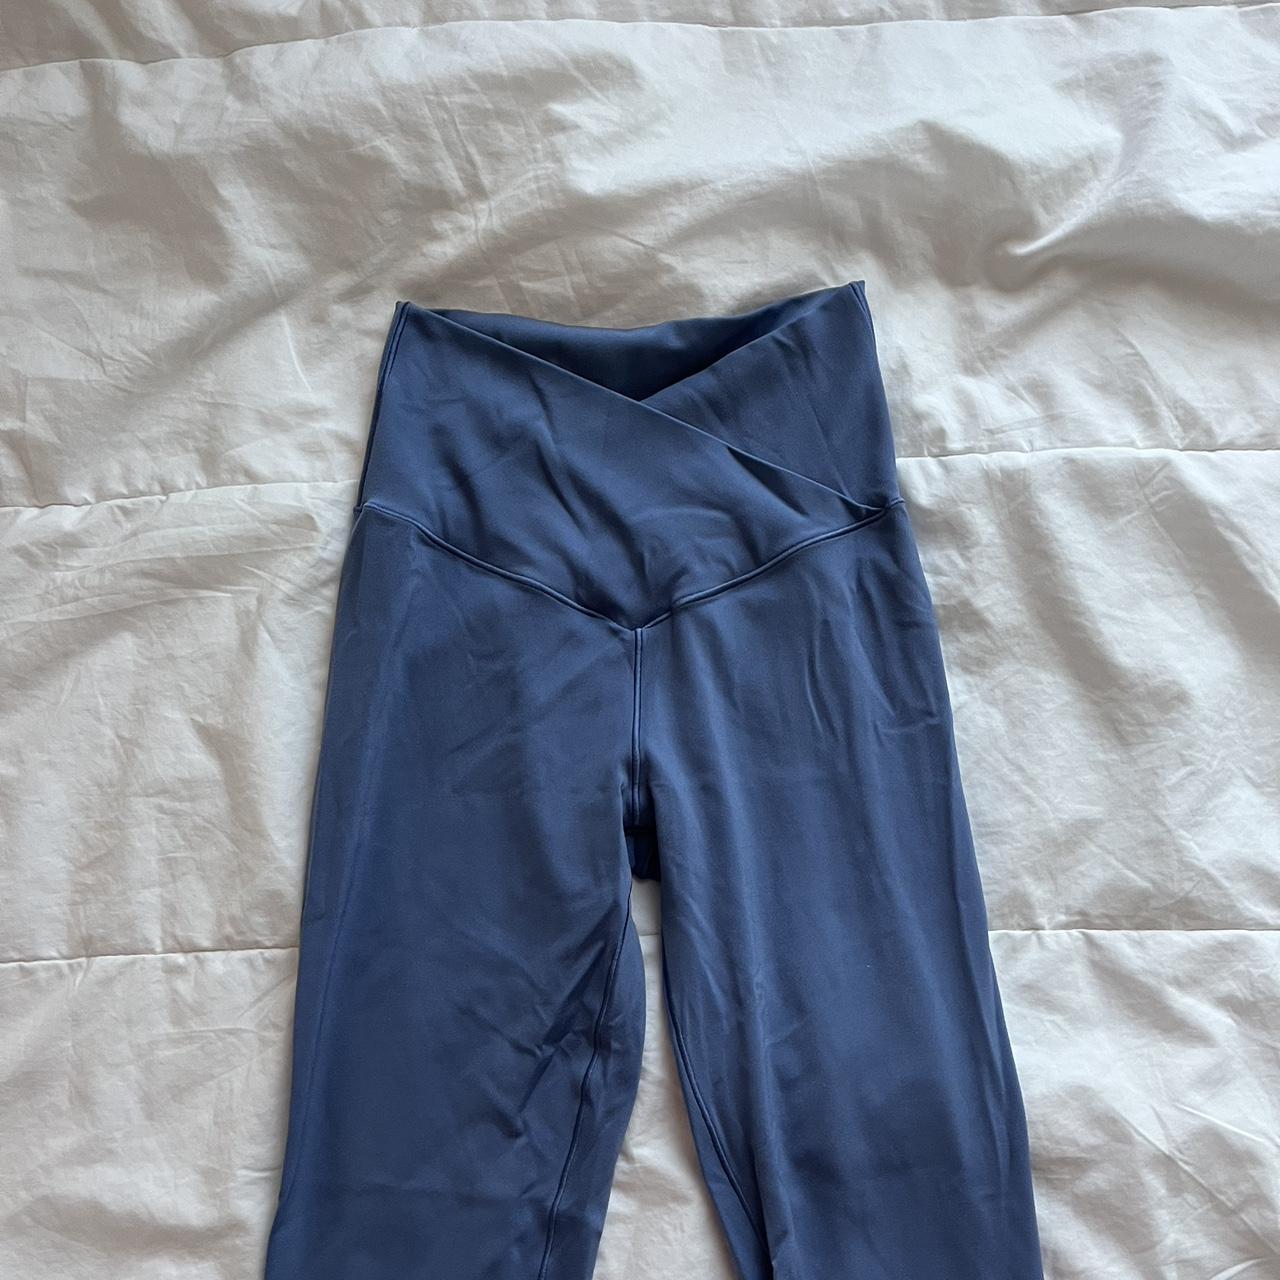 Blue aerie crossover leggings, worn only a couple of... - Depop